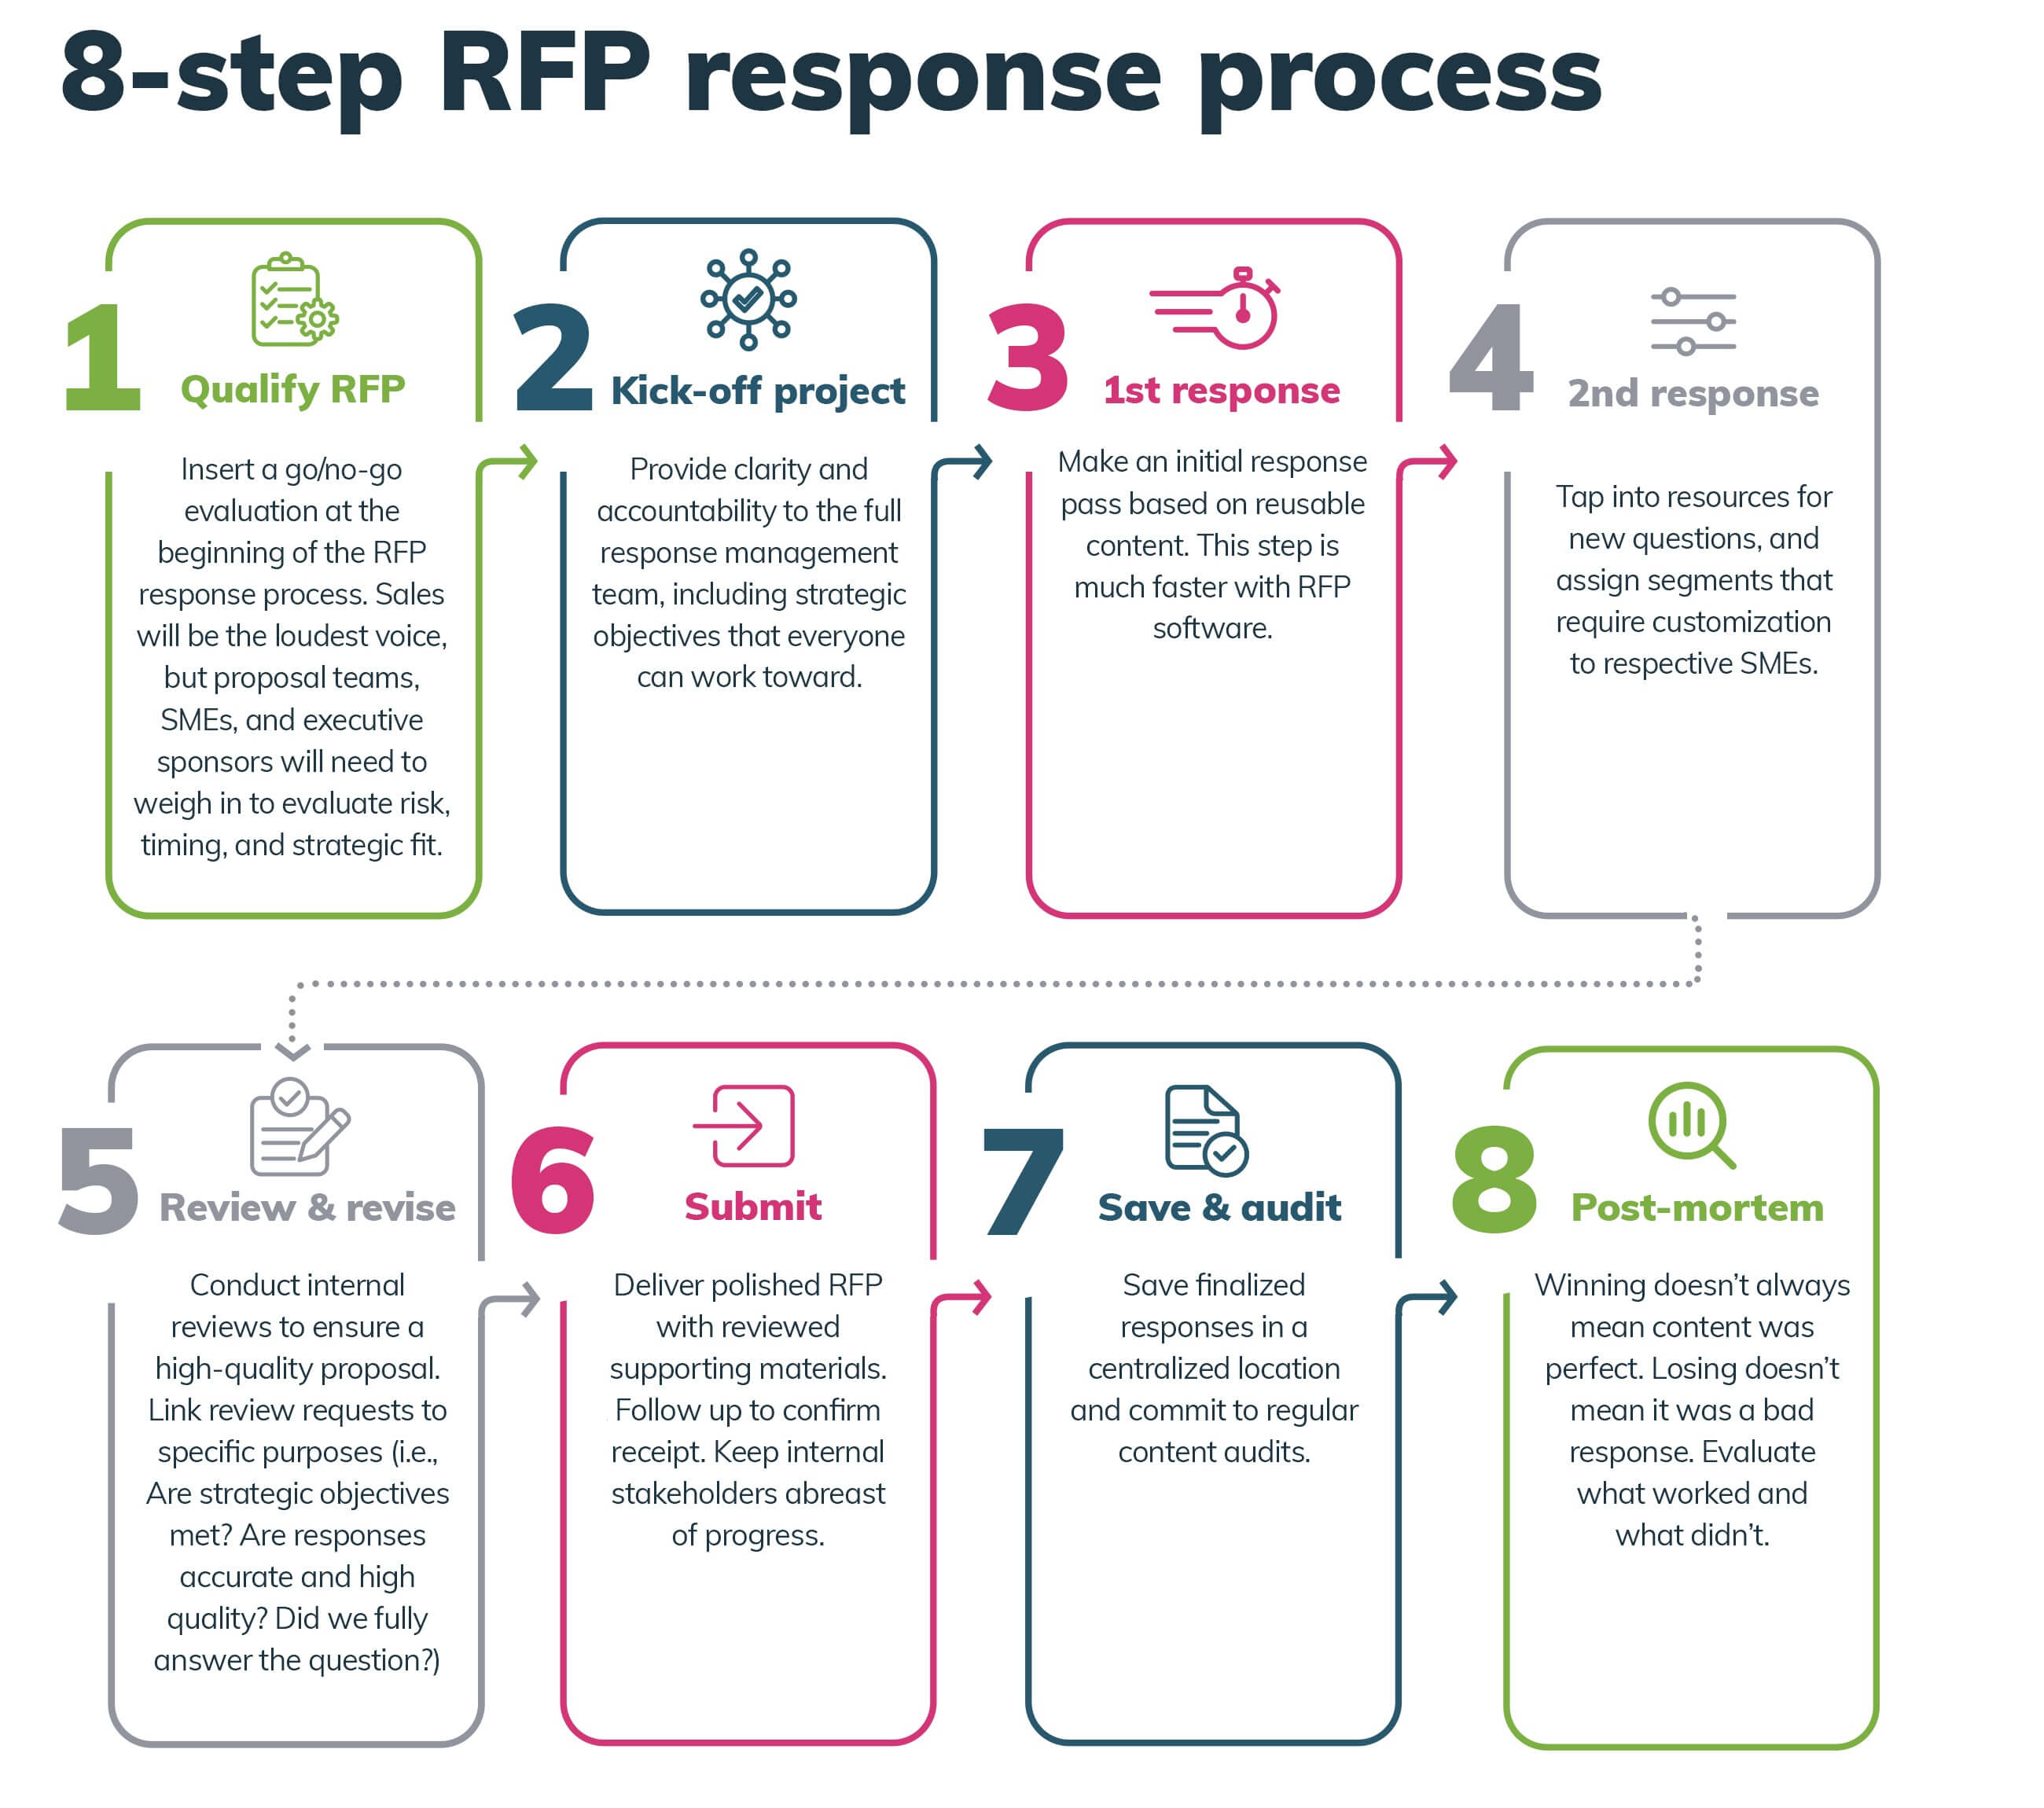 RFP process and steps